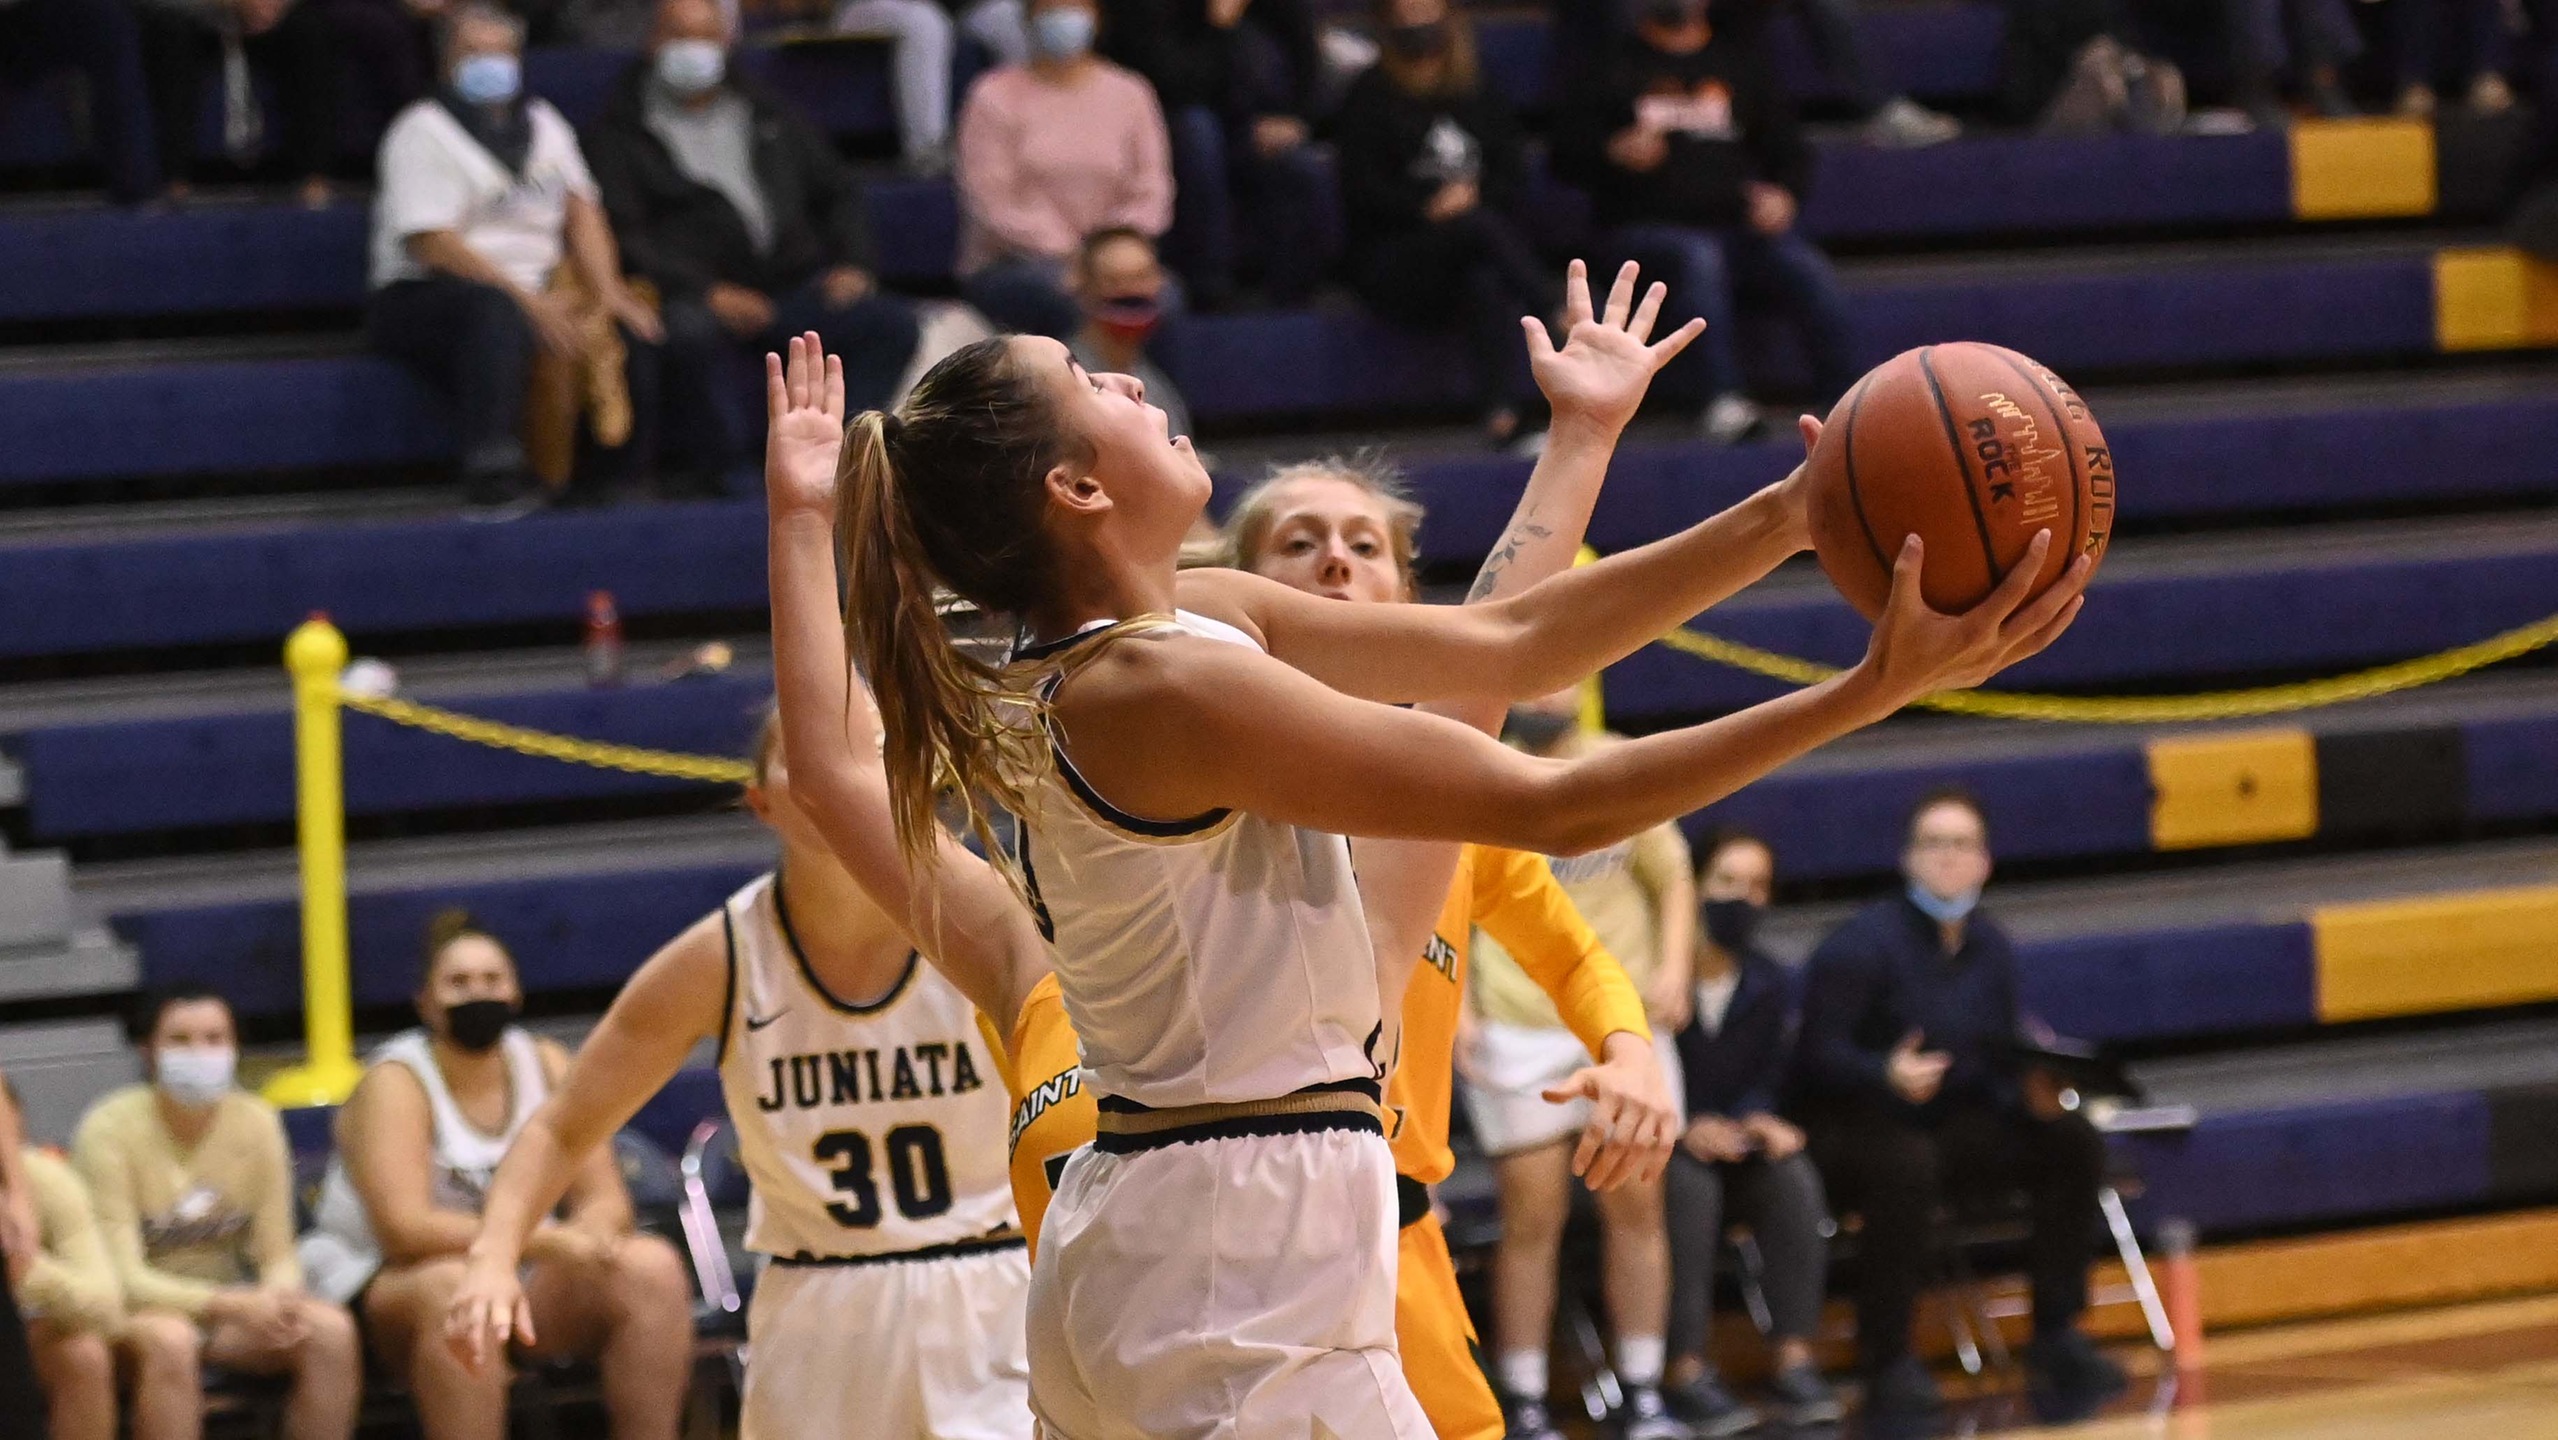 Eagles Fall to Delaware Valley's Big Second Half